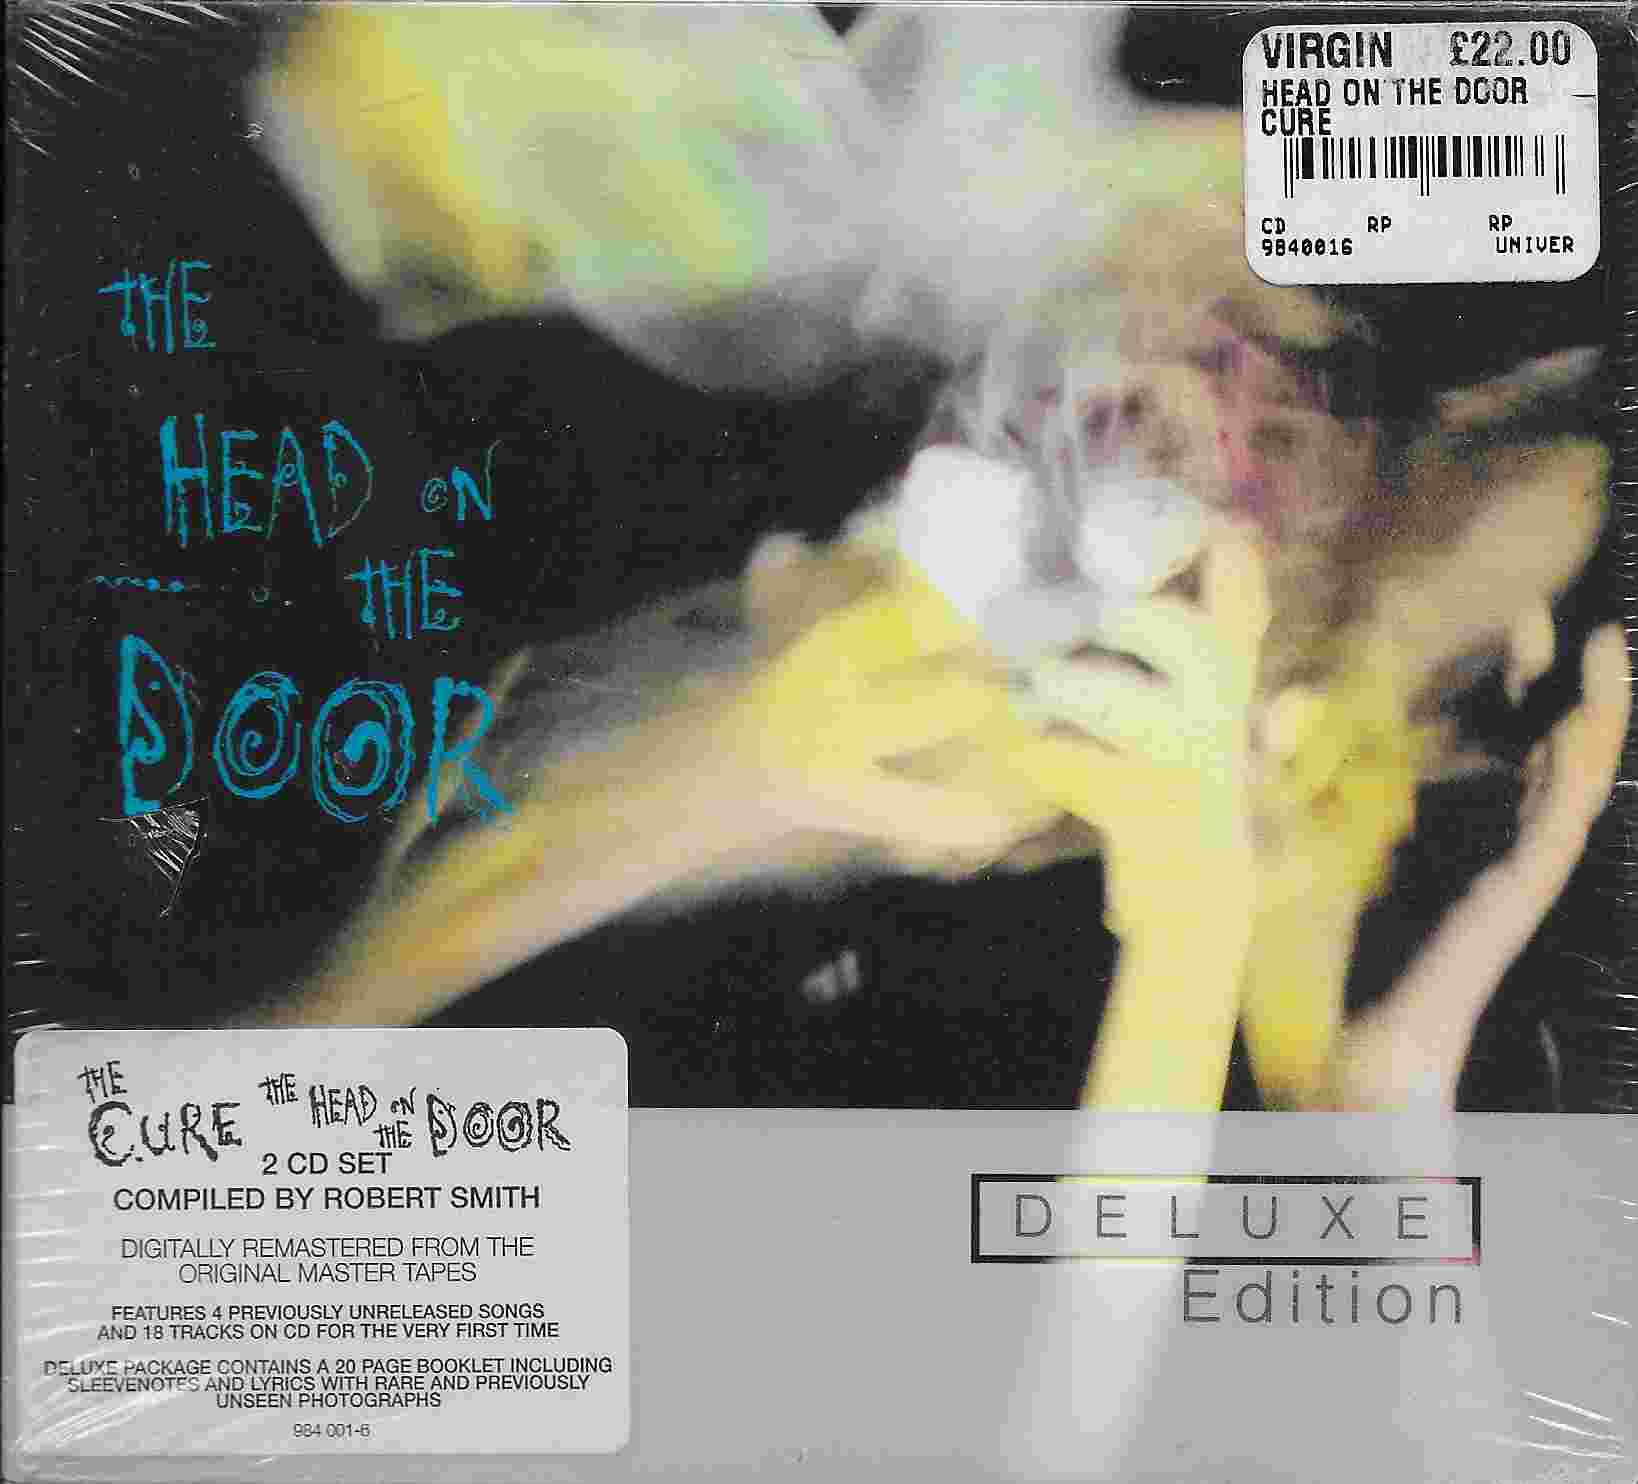 Picture of 984001 - 6 The head on the door by artist The Cure 